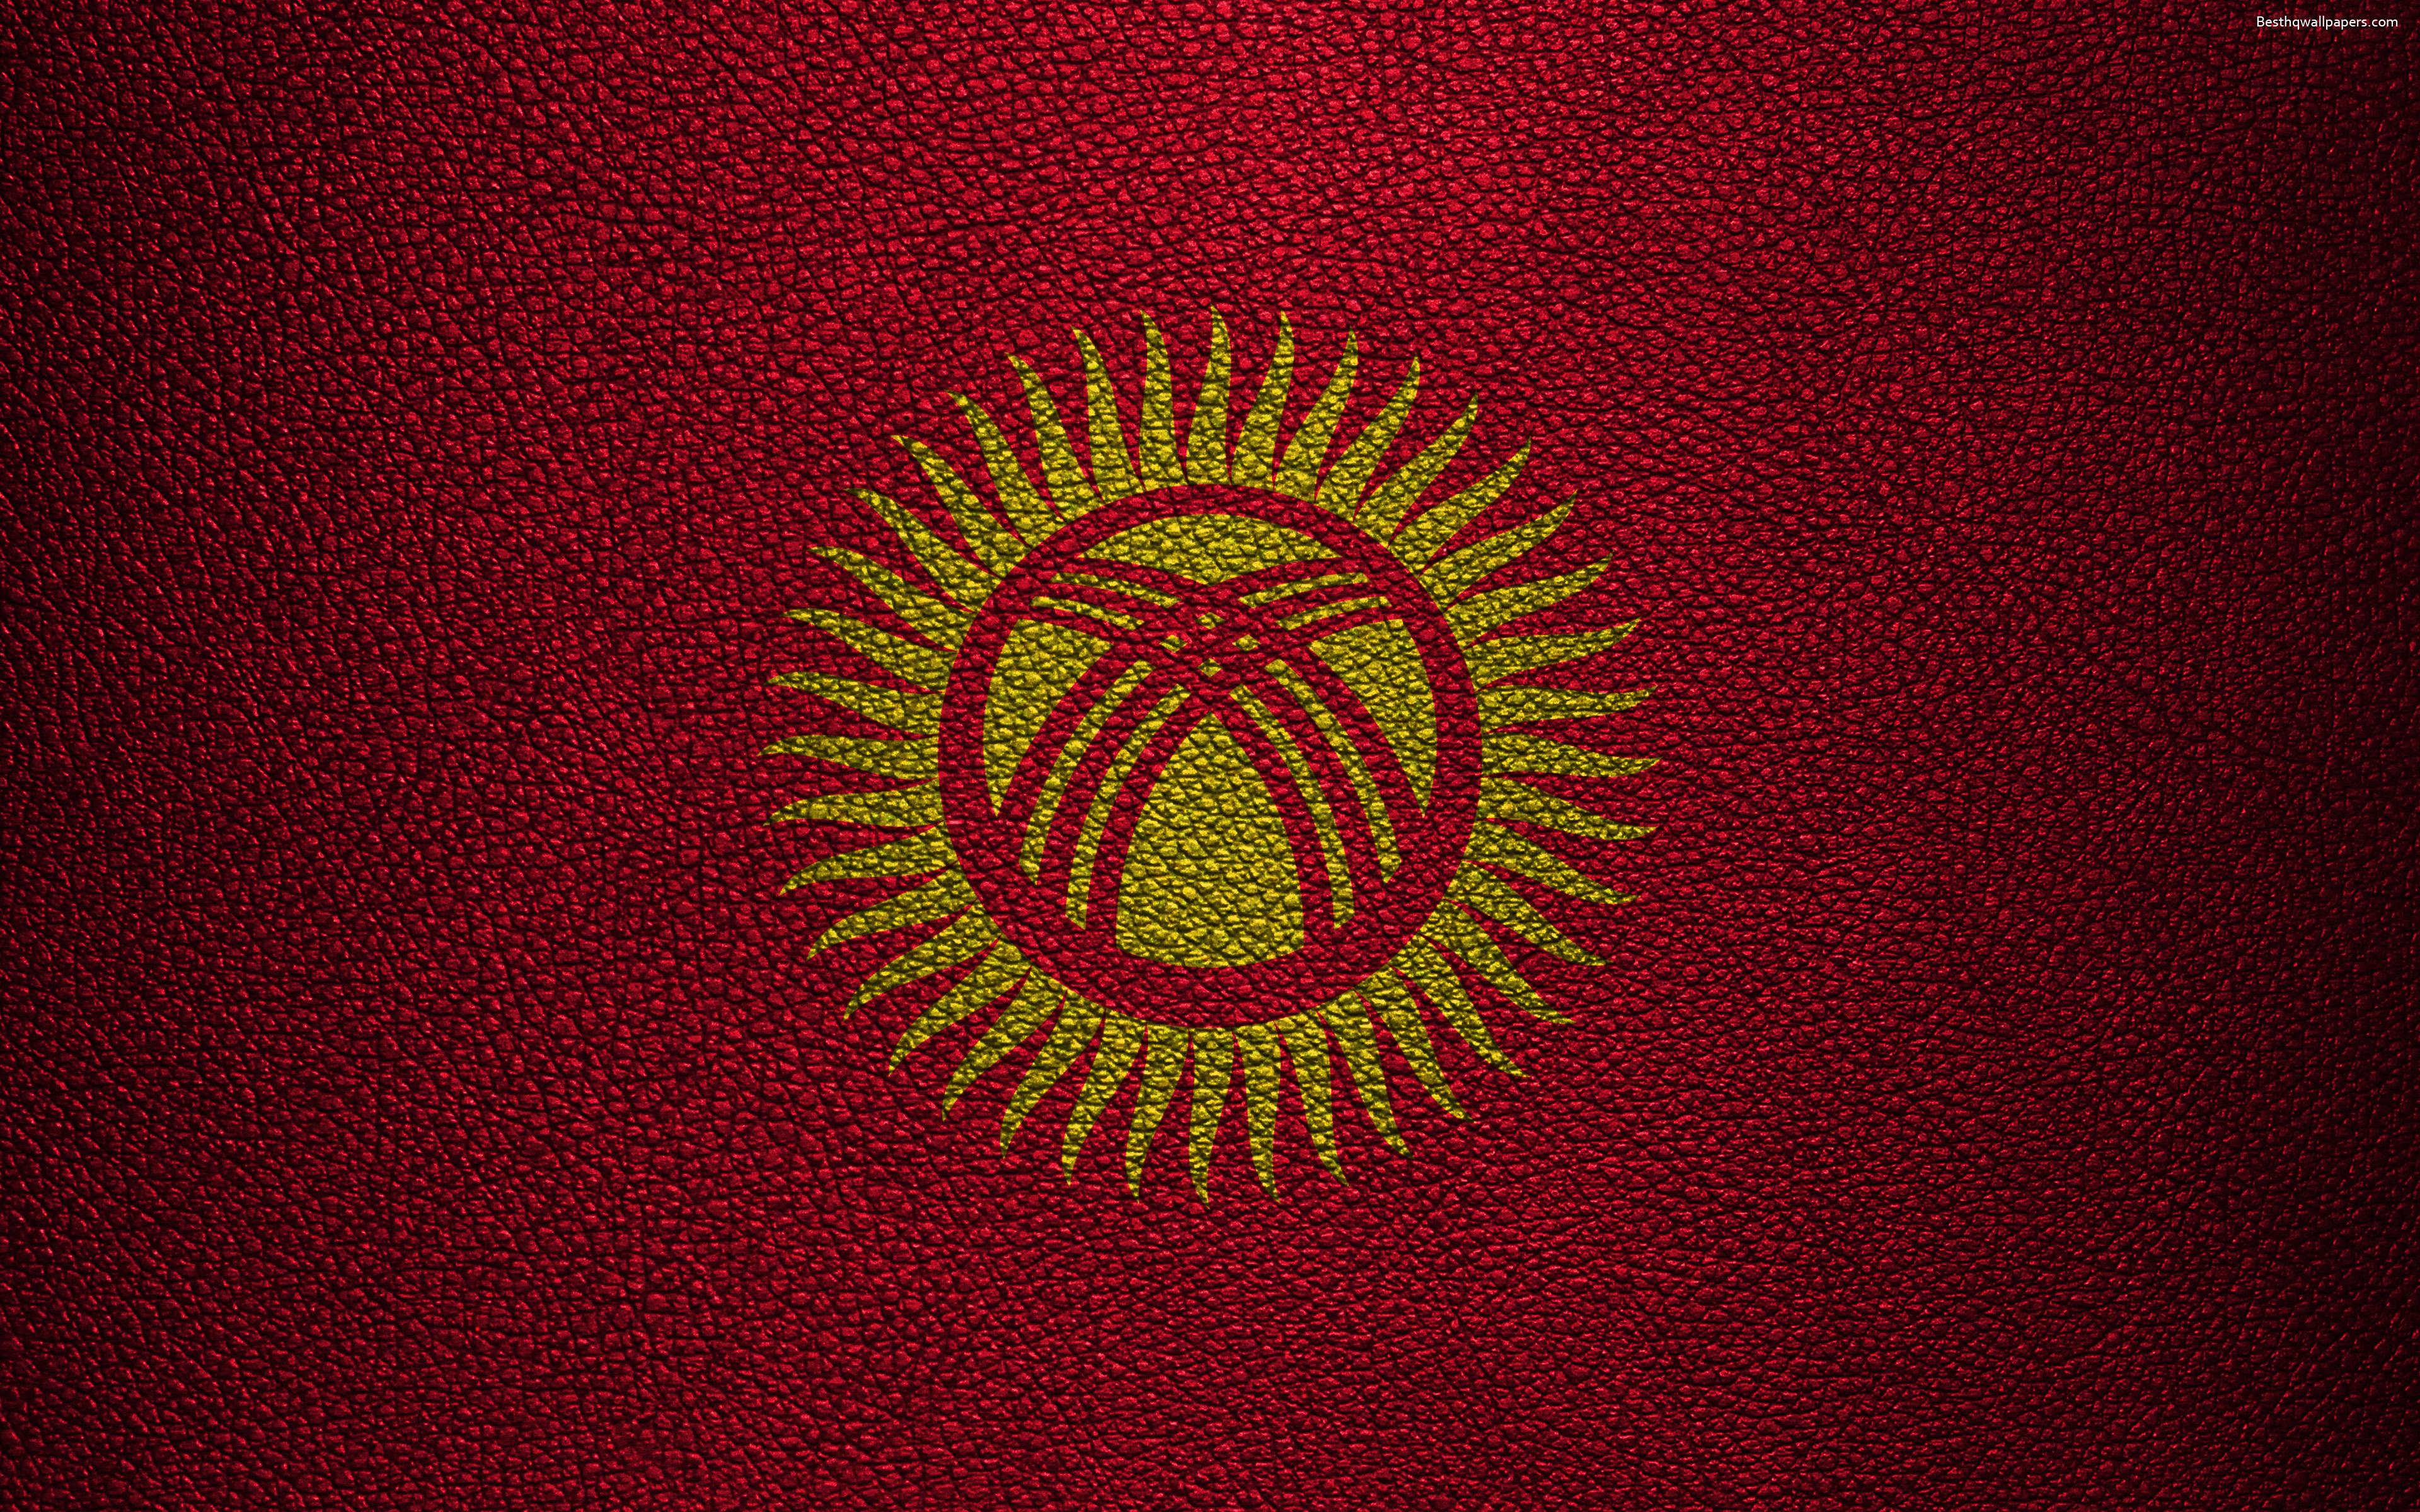 Download wallpaper Flag of Kyrgyzstan, 4K, leather texture, Kyrgyz